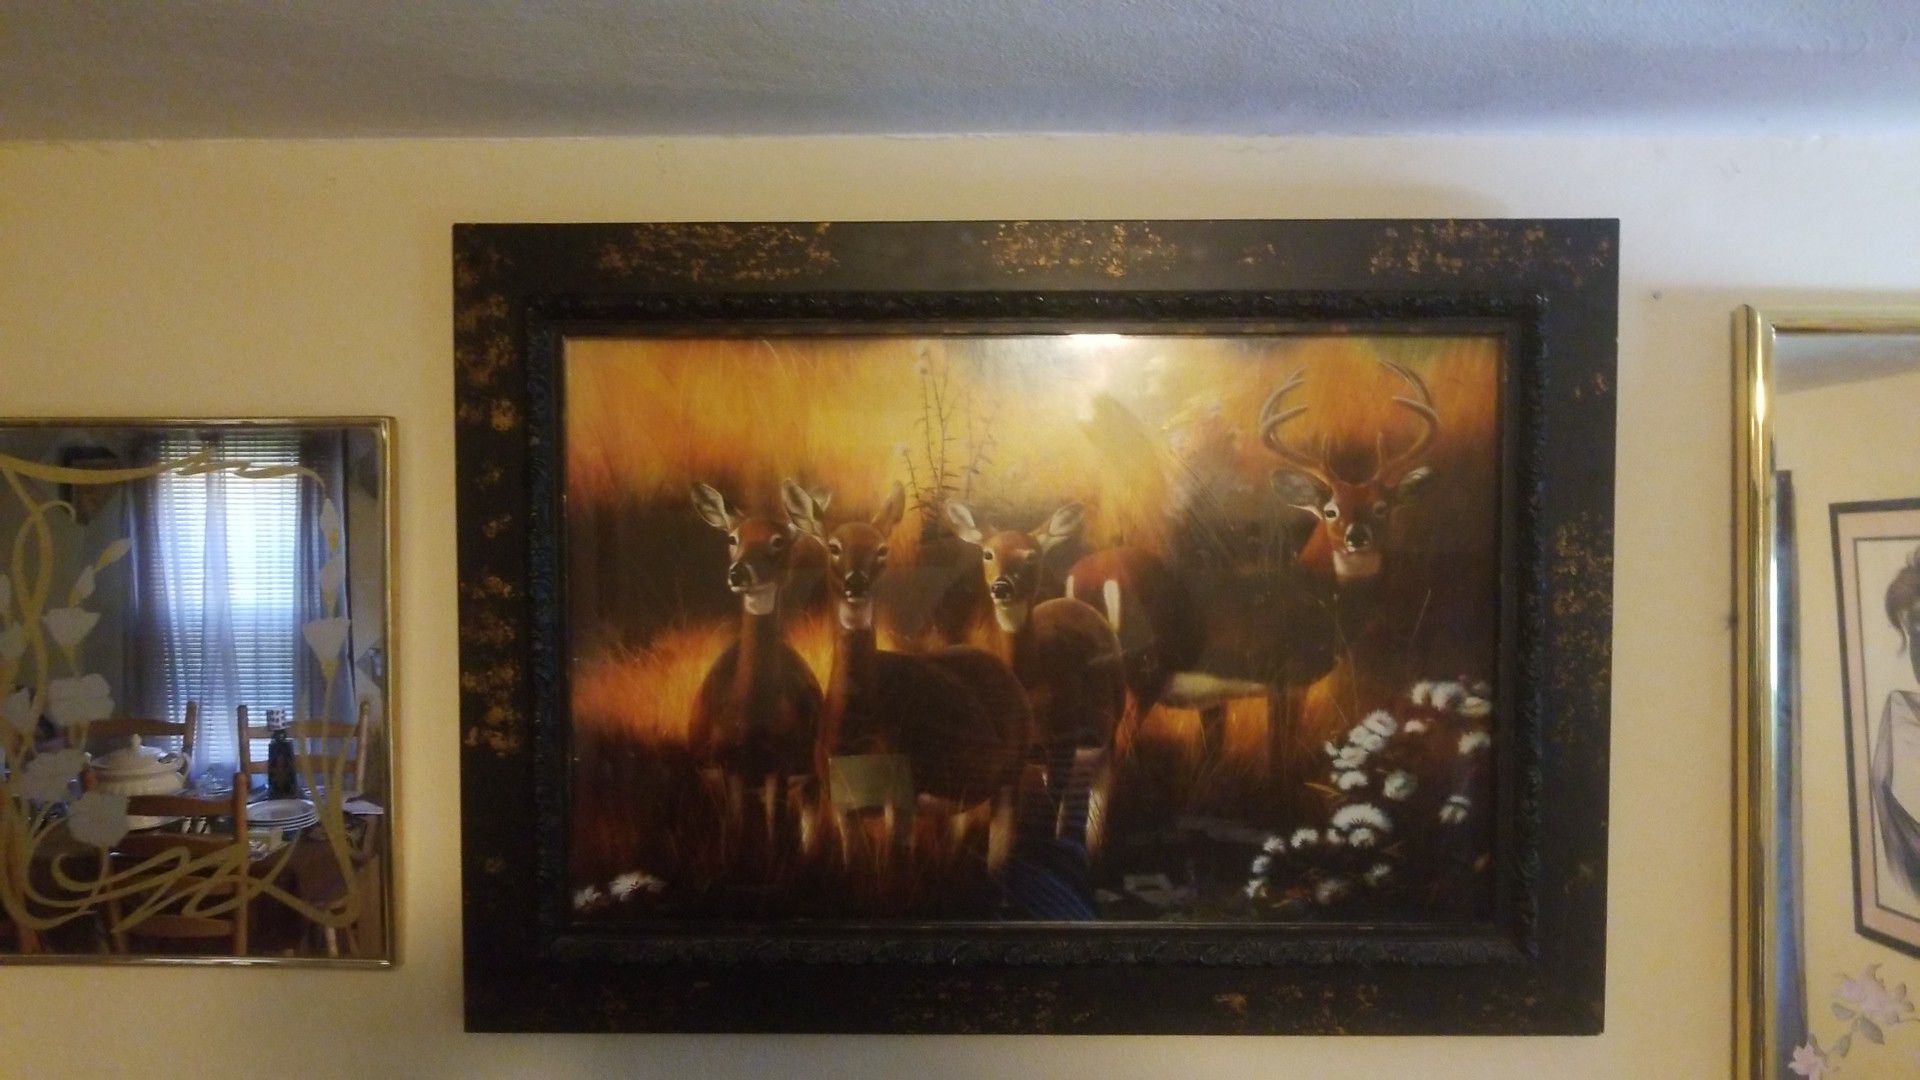 41" x 28" Beautiful Framed Deer Painting/Picture